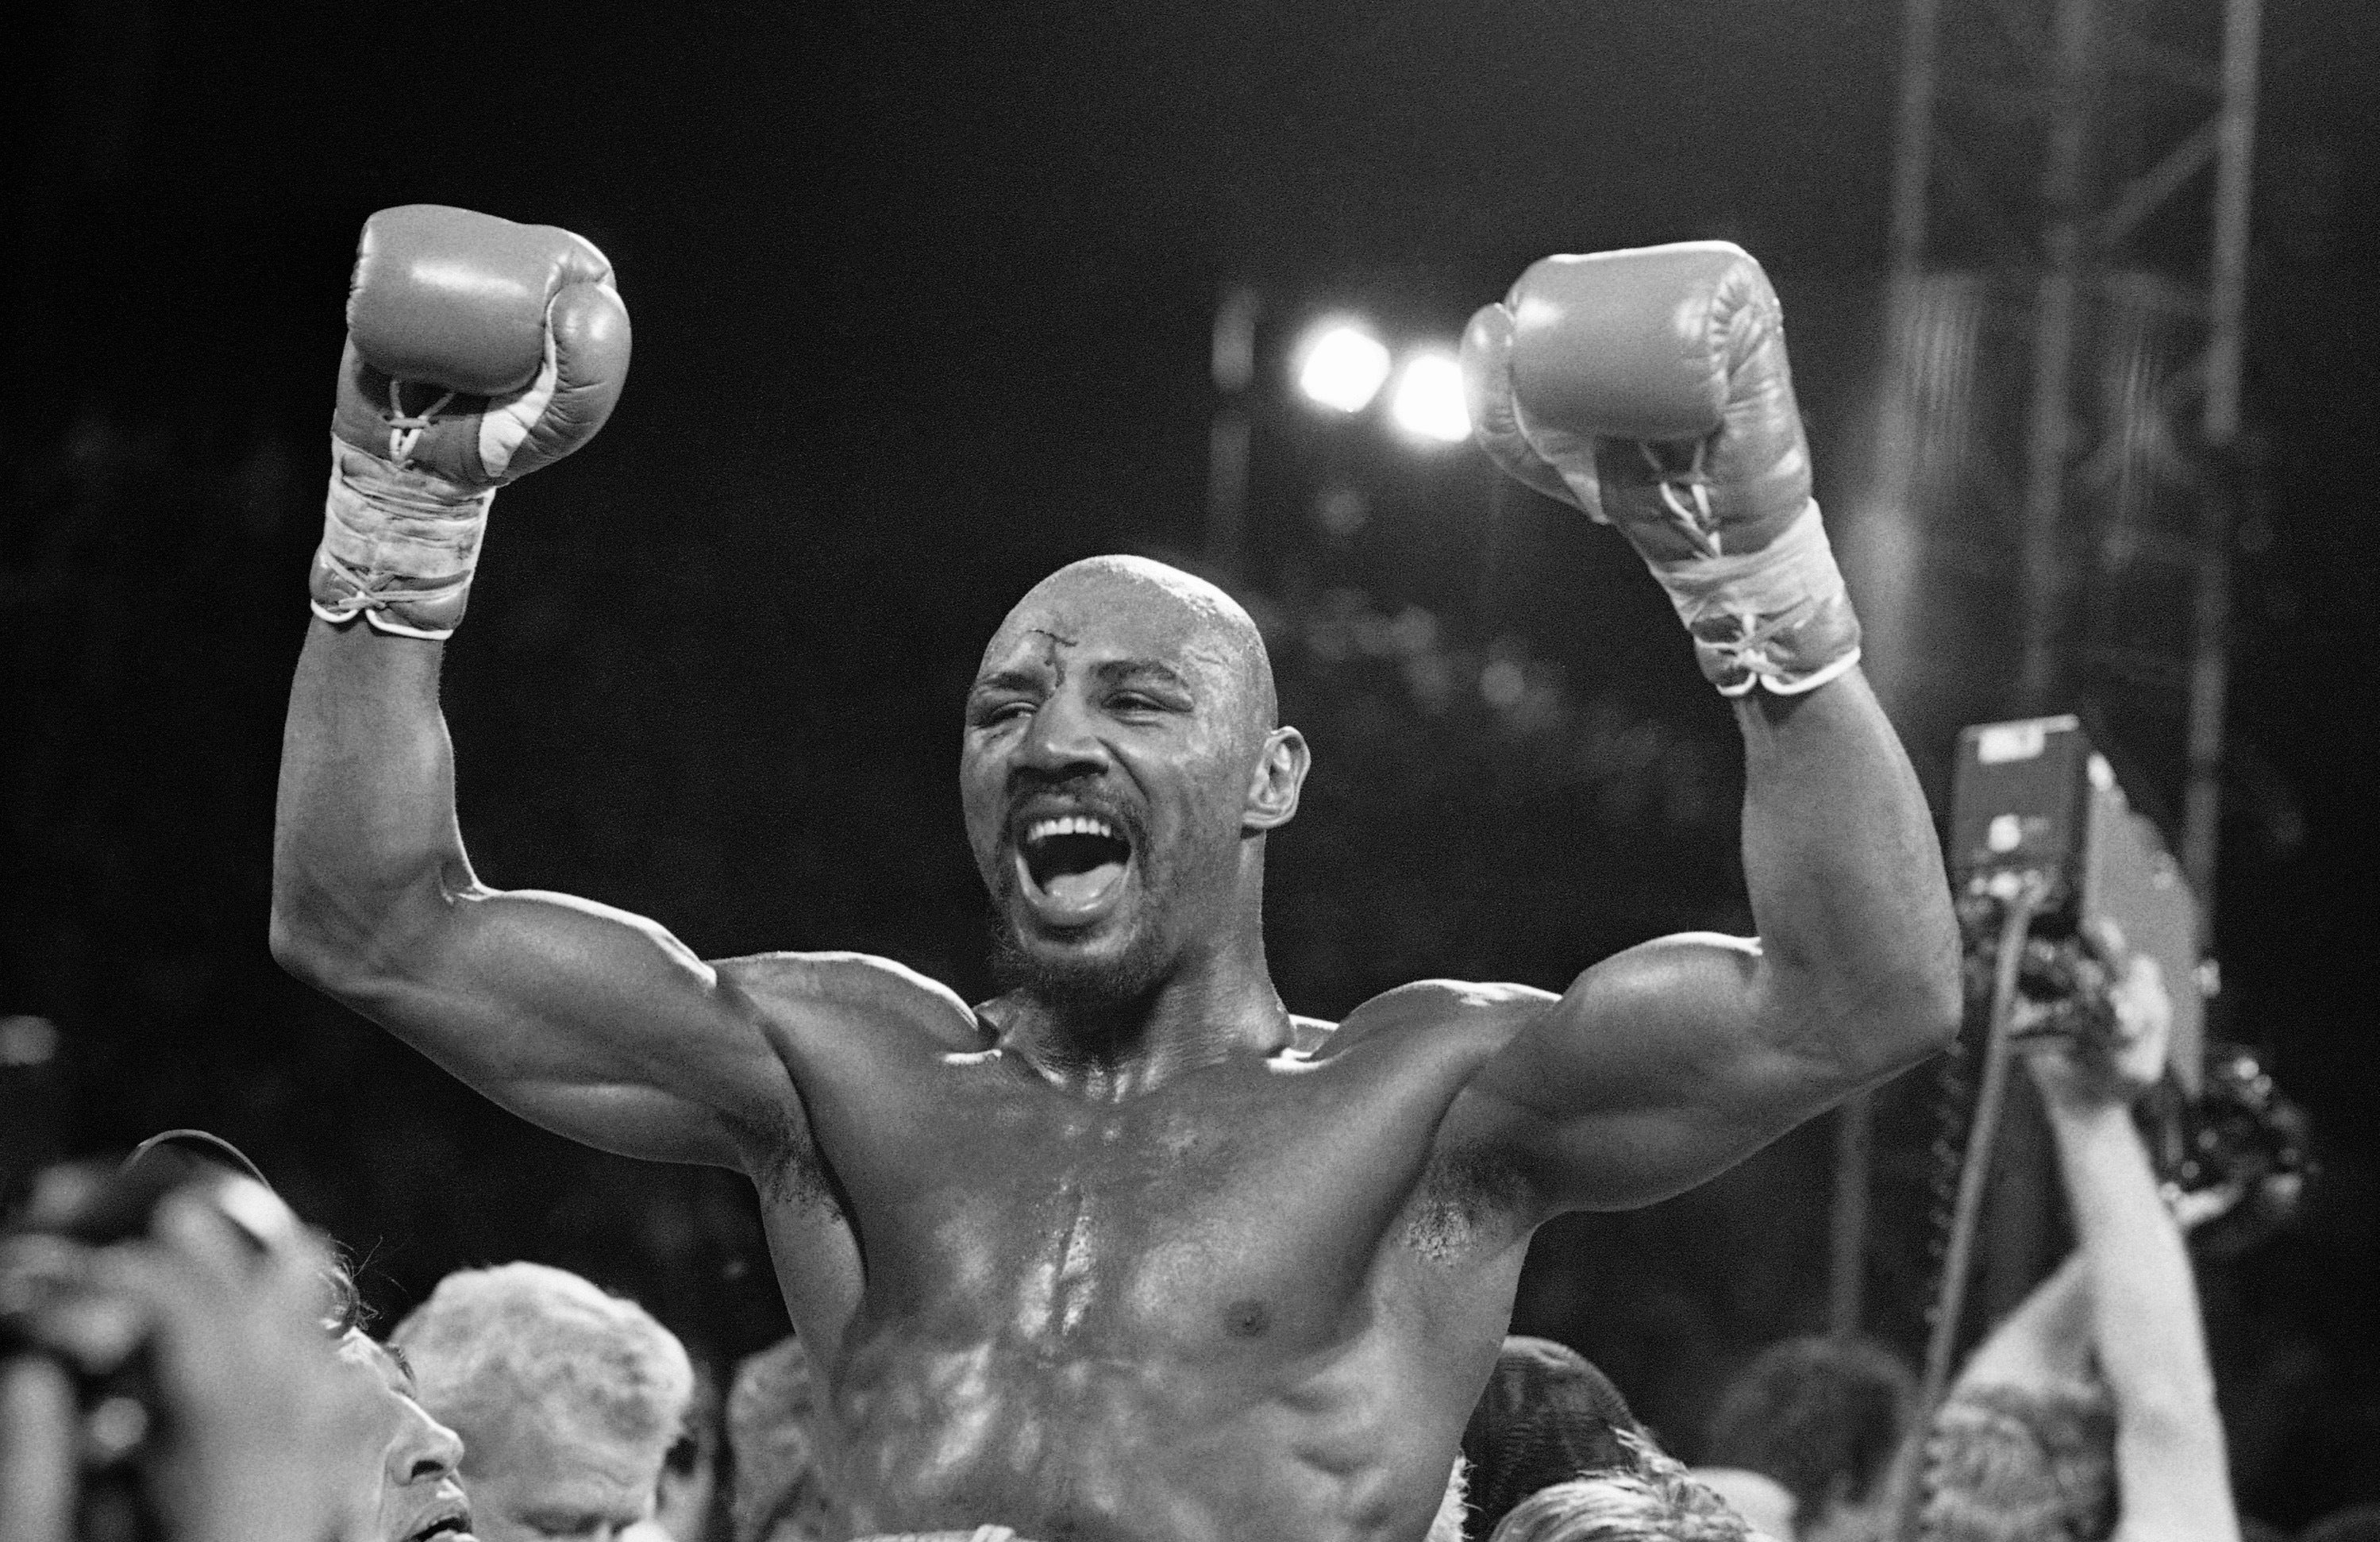 Brockton to name street in honor of the late Marvin Hagler Boston Marvelous Marvin Hagler New Jersey Mass Newark The Independent